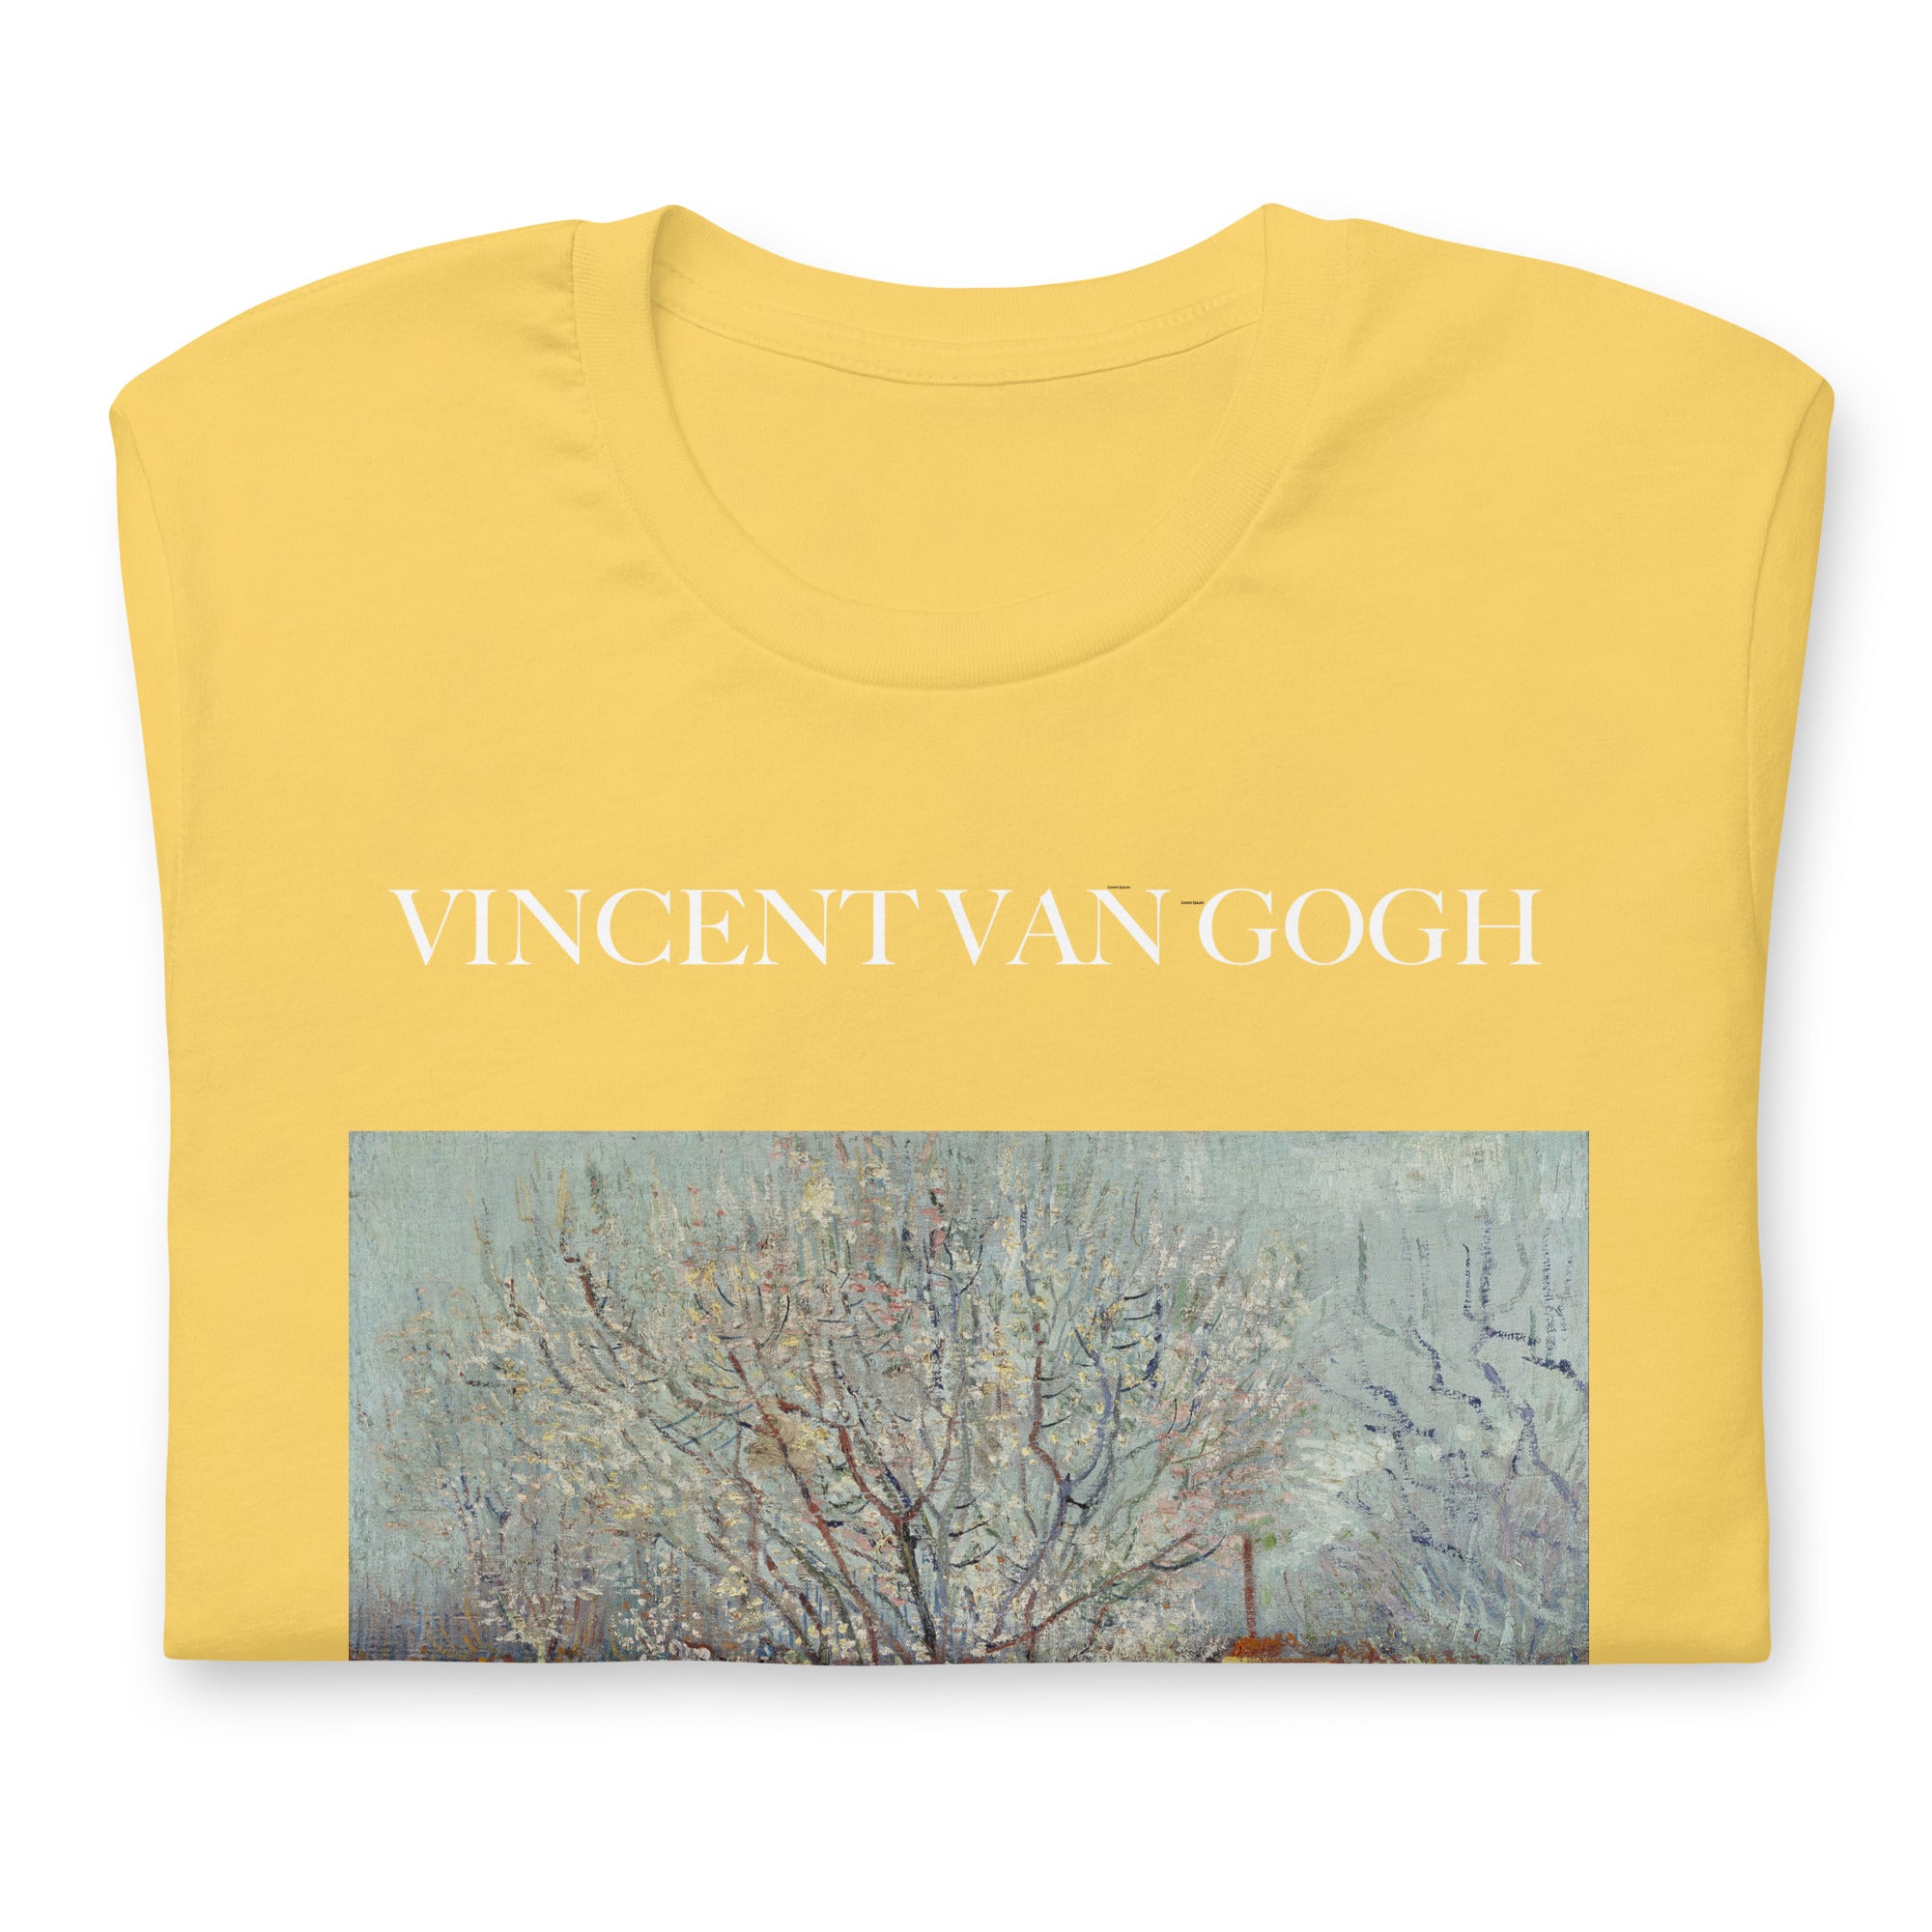 Vincent van Gogh 'Orchard in Blossom' Famous Painting T-Shirt | Unisex Classic Art Tee